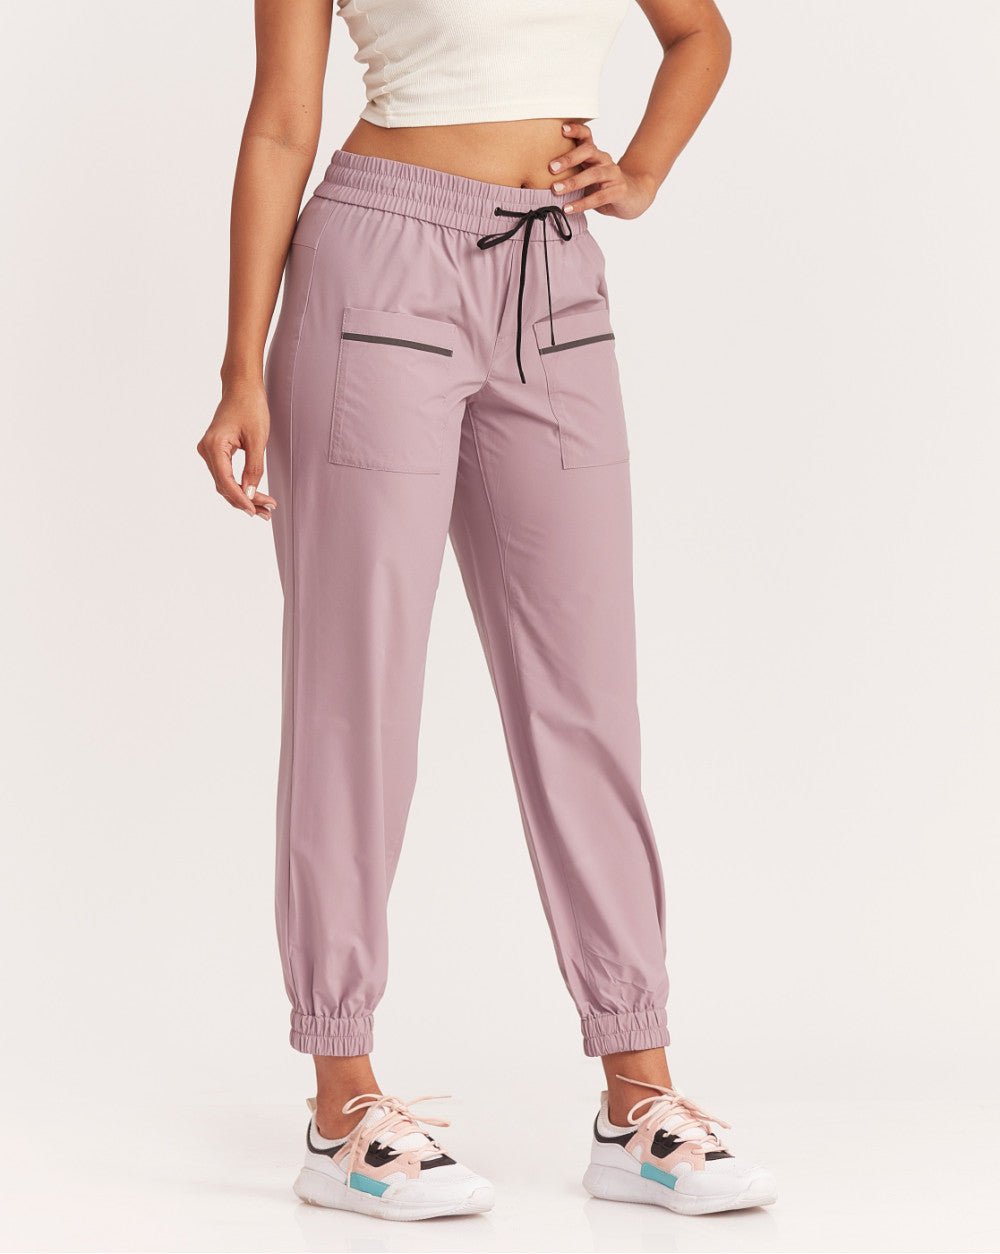 Buy Women Pink Solid Casual Slim Fit Trousers Online - 816715